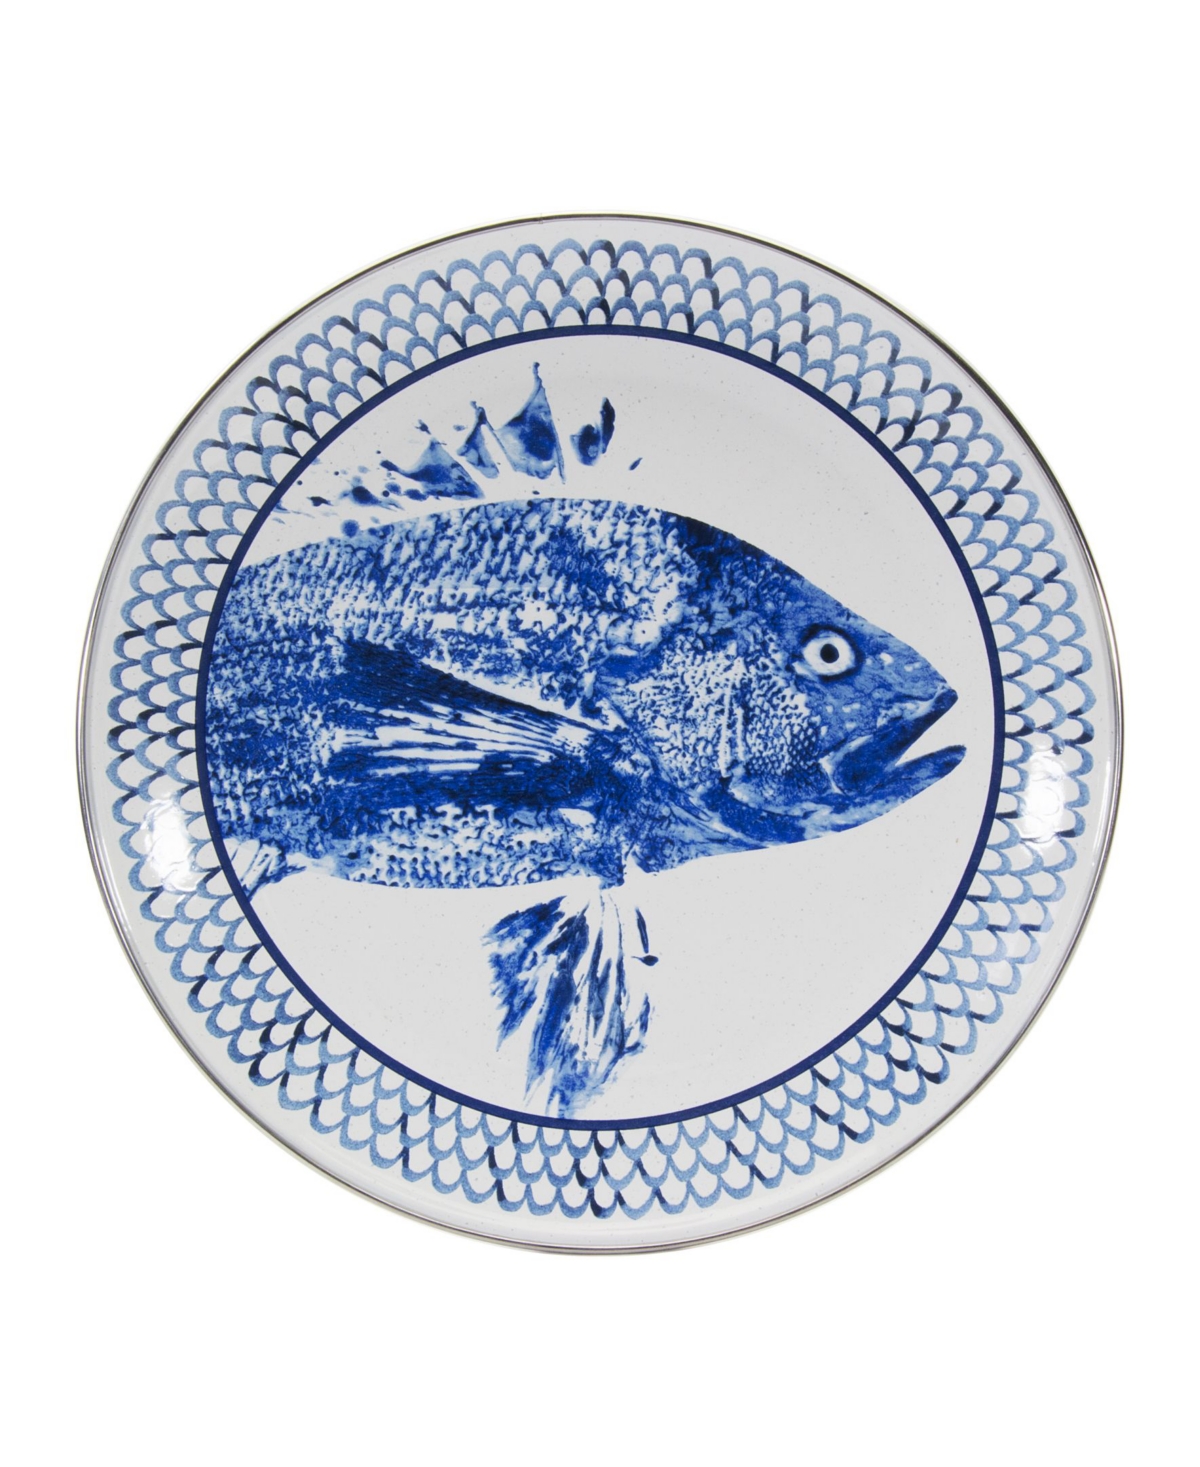 Fish Camp Enamelware Chargers, Set of 2 - Blue